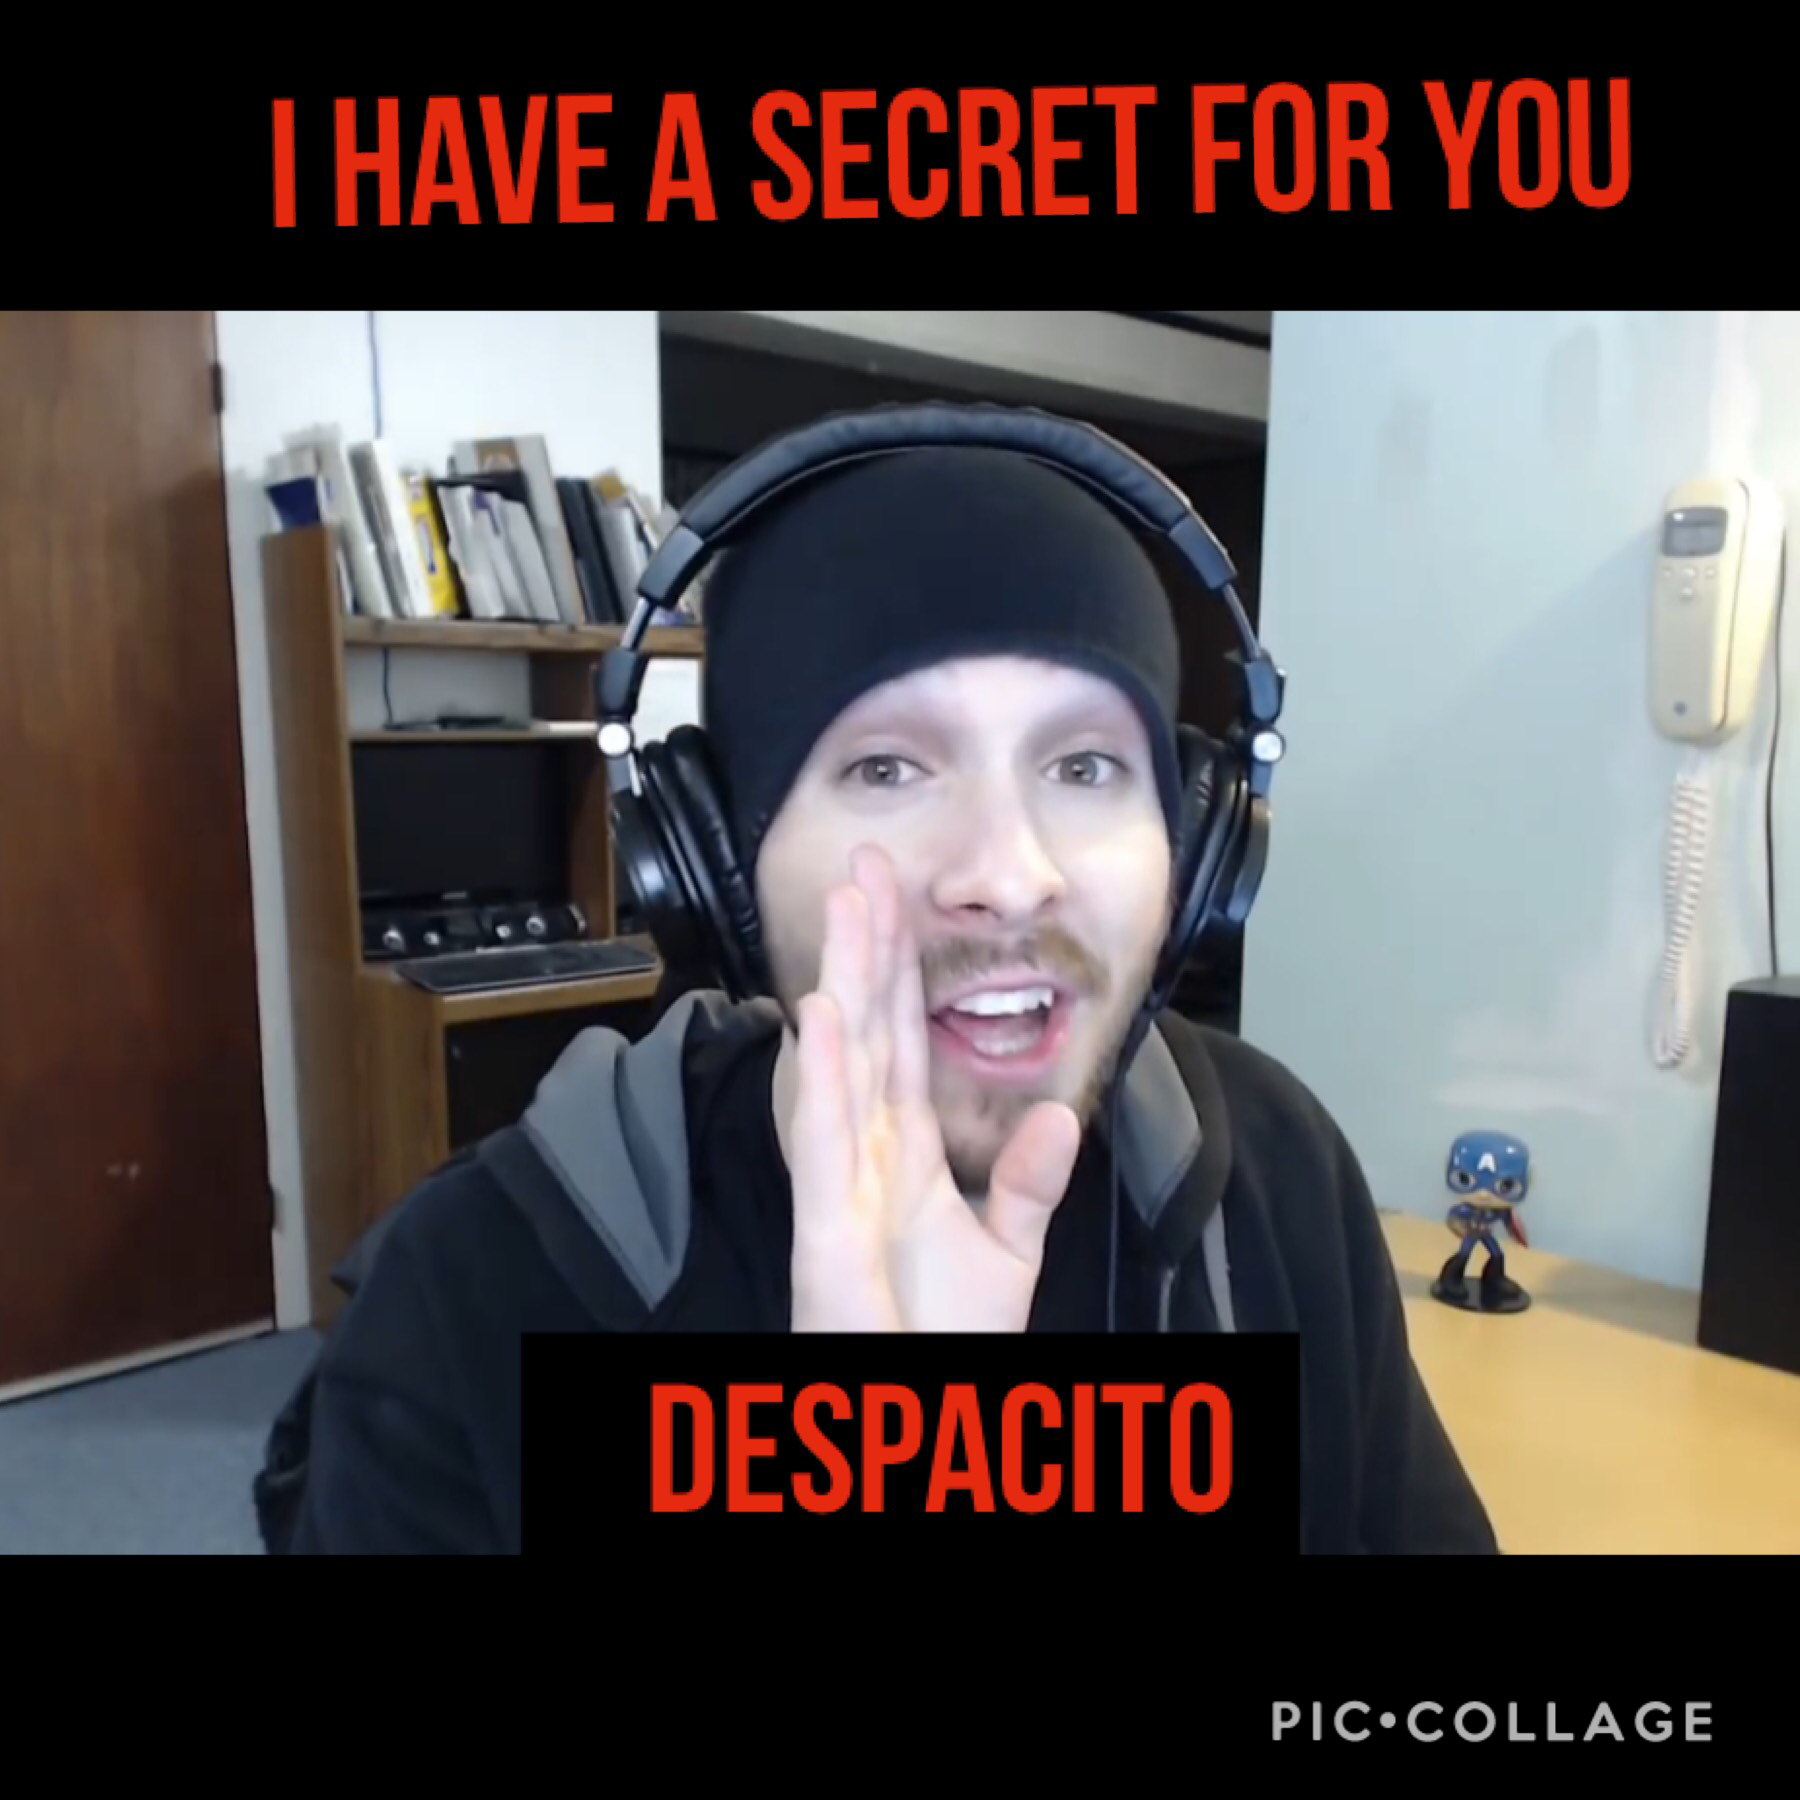 From charmx video: I have a secret for you